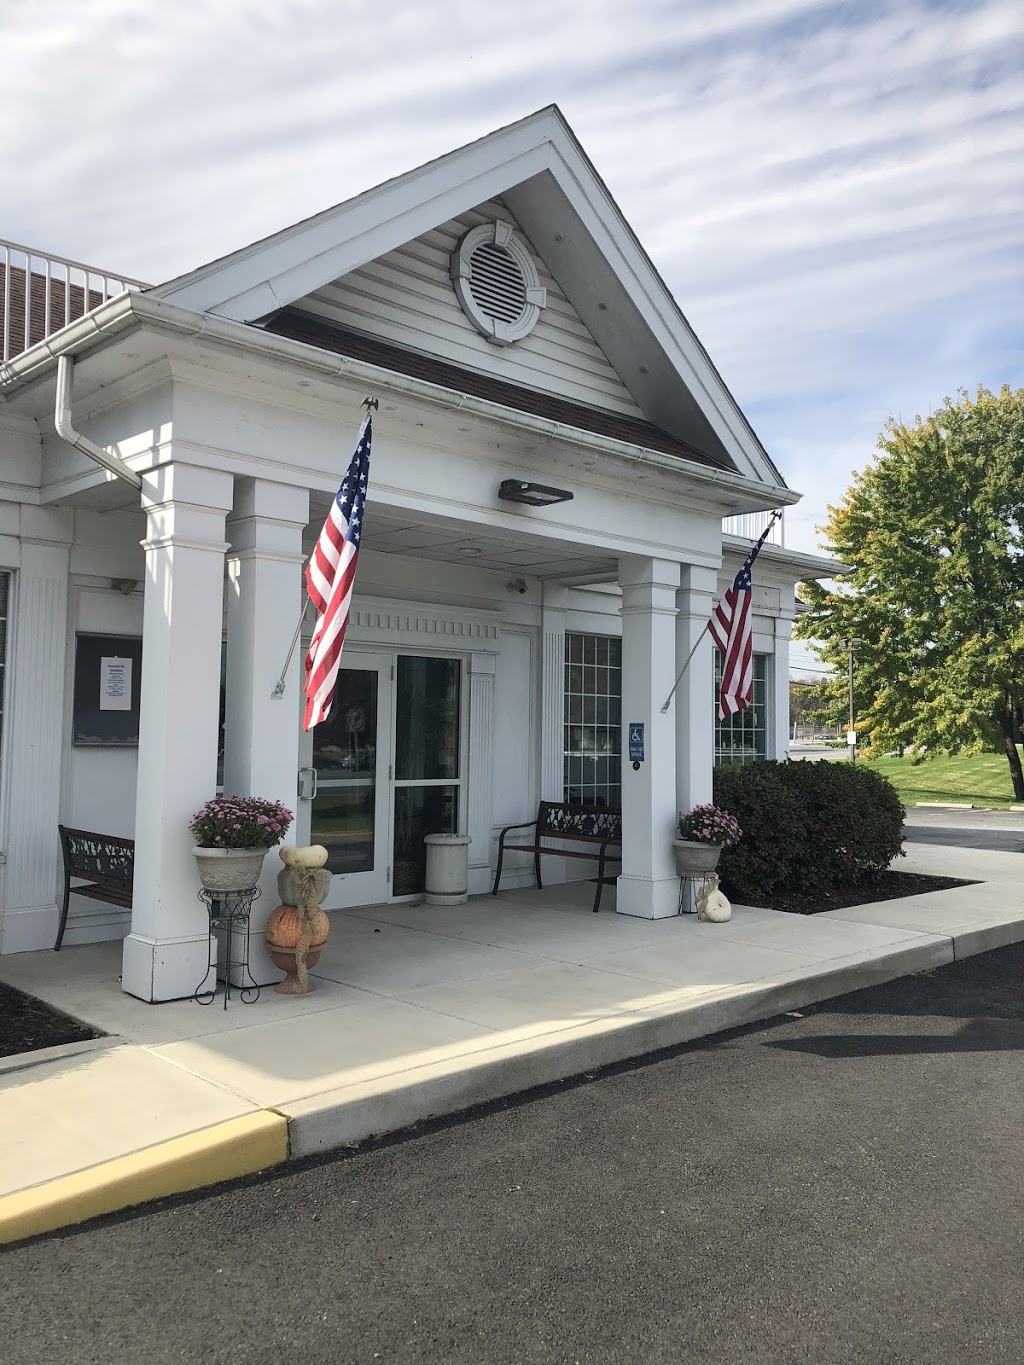 Cole Funeral Home & Cremation Center | 402 E Penn Ave, Robesonia, PA 19551, USA | Phone: (610) 693-6347